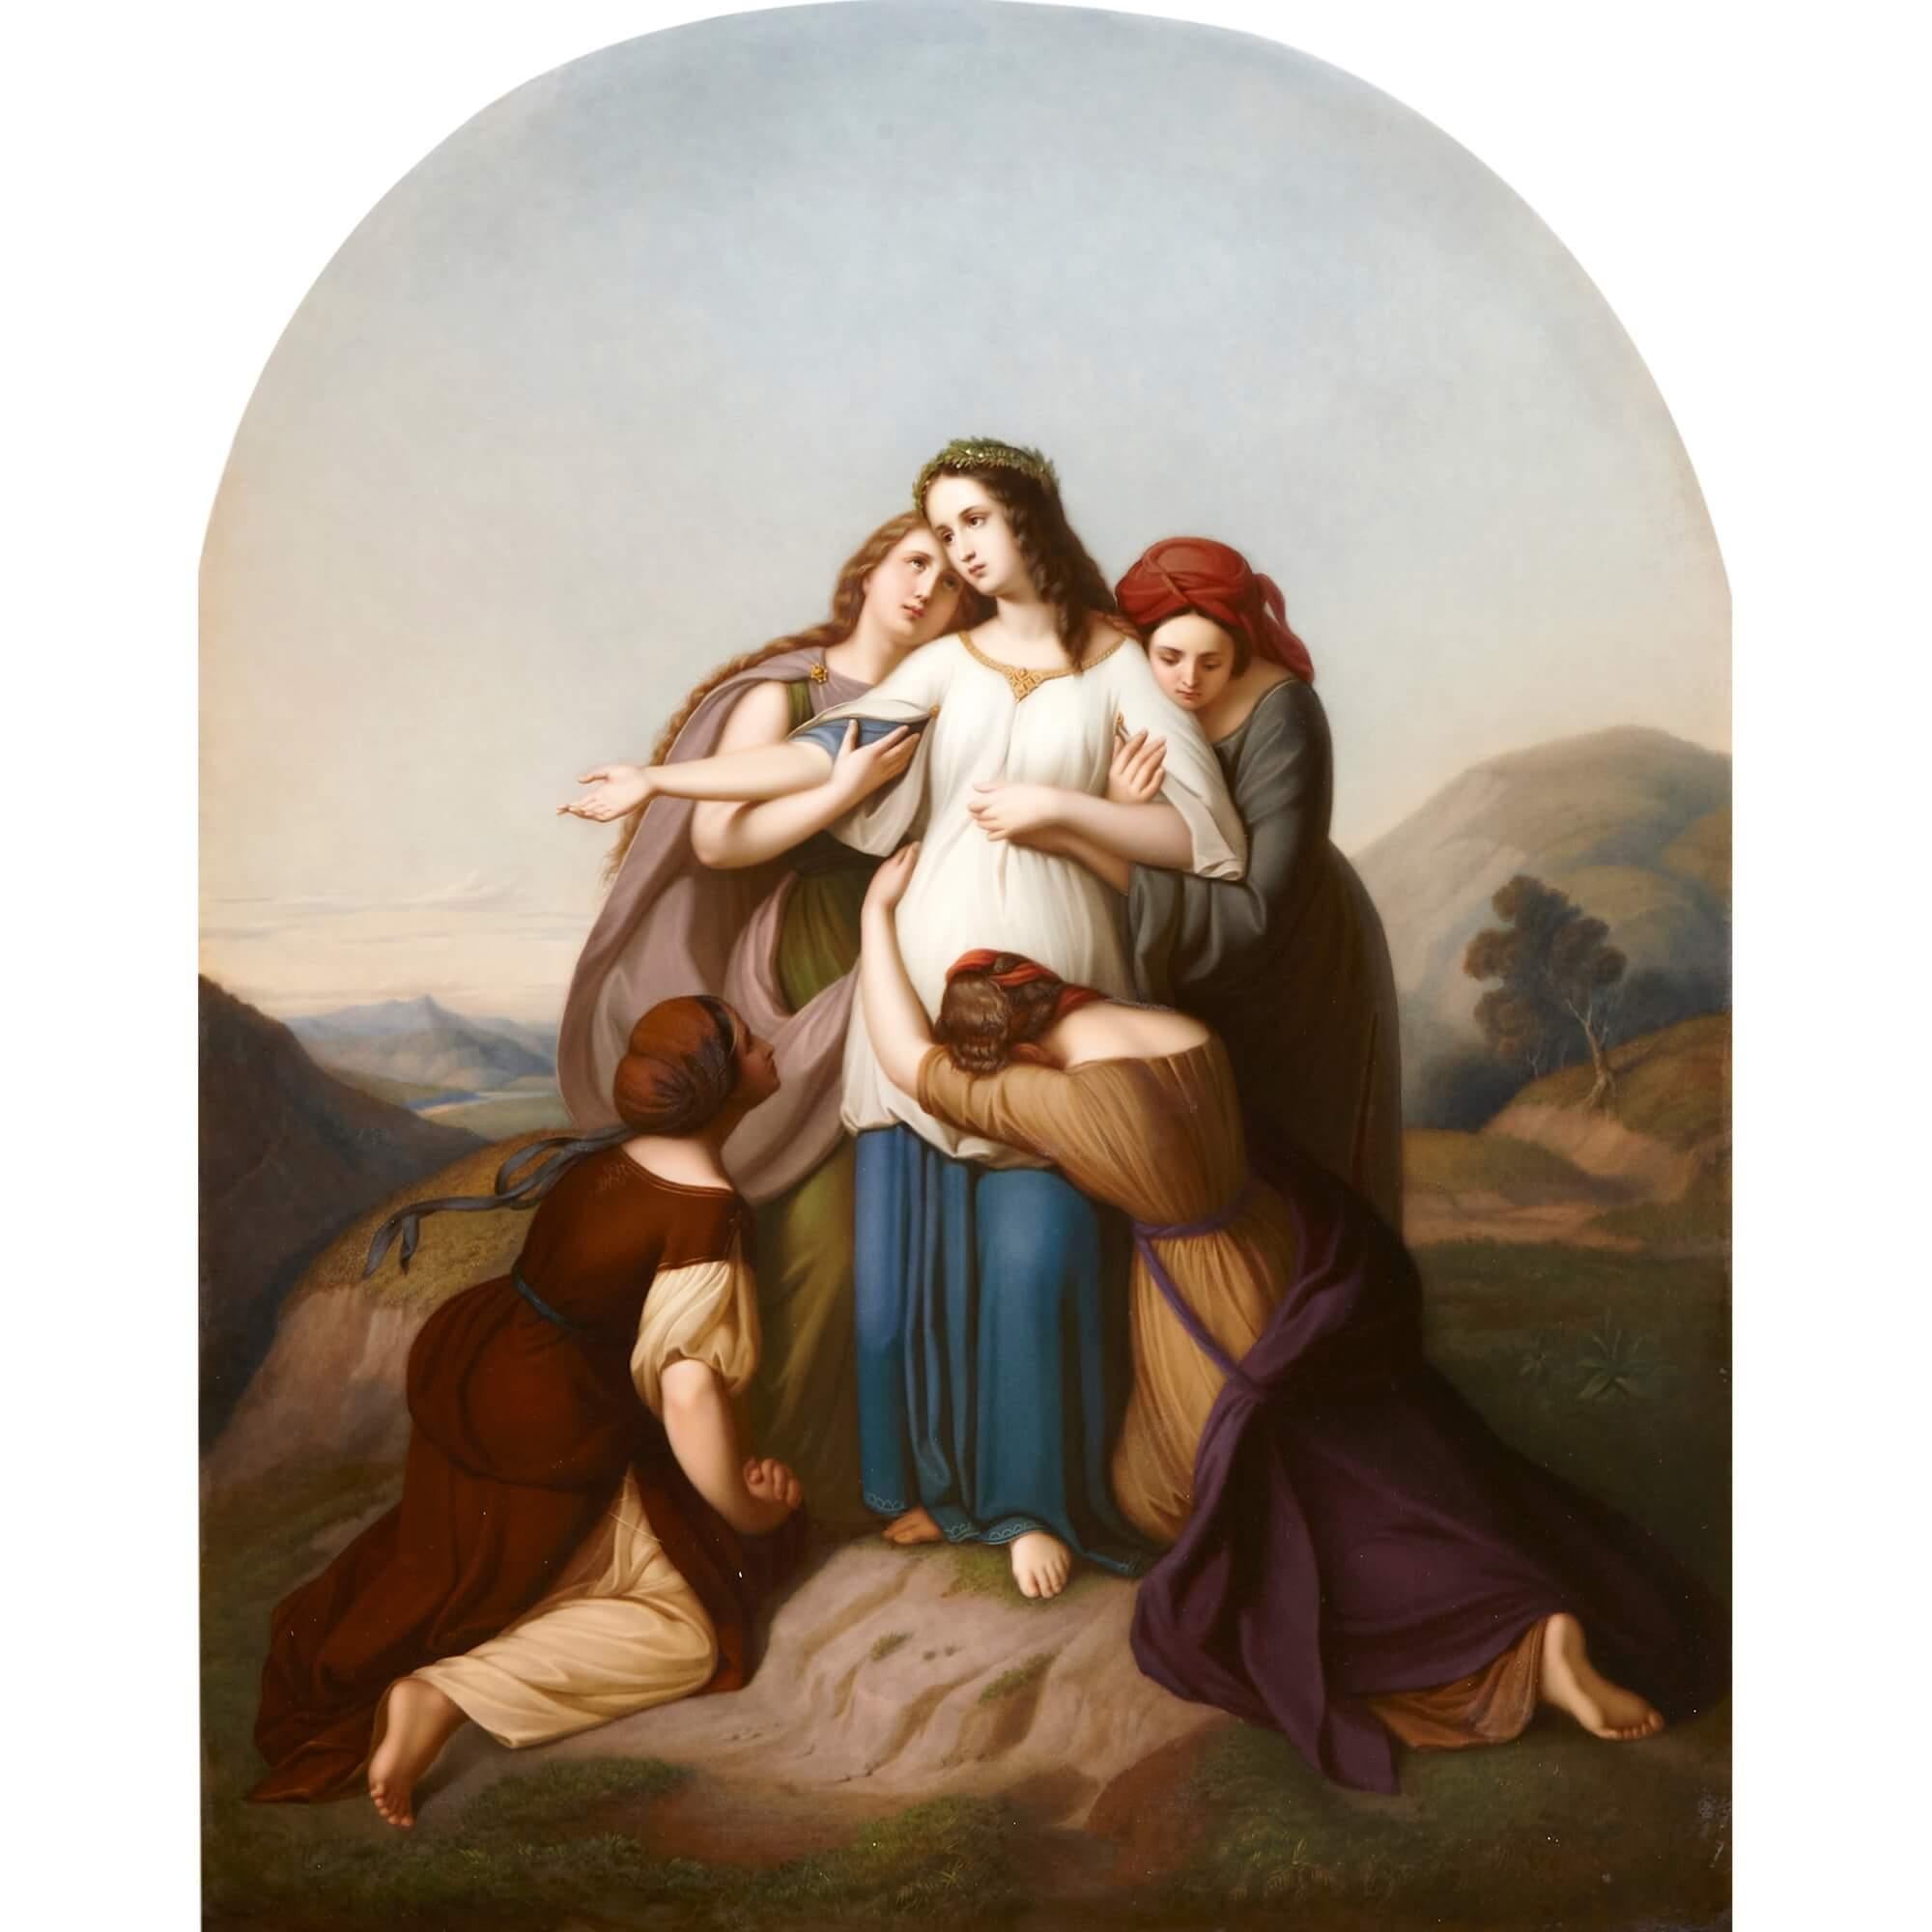 A very large giltwood framed K.P.M. porcelain plaque of Jephthah's daughter
German, late 19th century
Frame: height 97cm, width 84cm, depth 8cm
Plaque: height 65cm, width 52cm

Dating to circa 1870, this wonderful porcelain plaque by K.P.M.